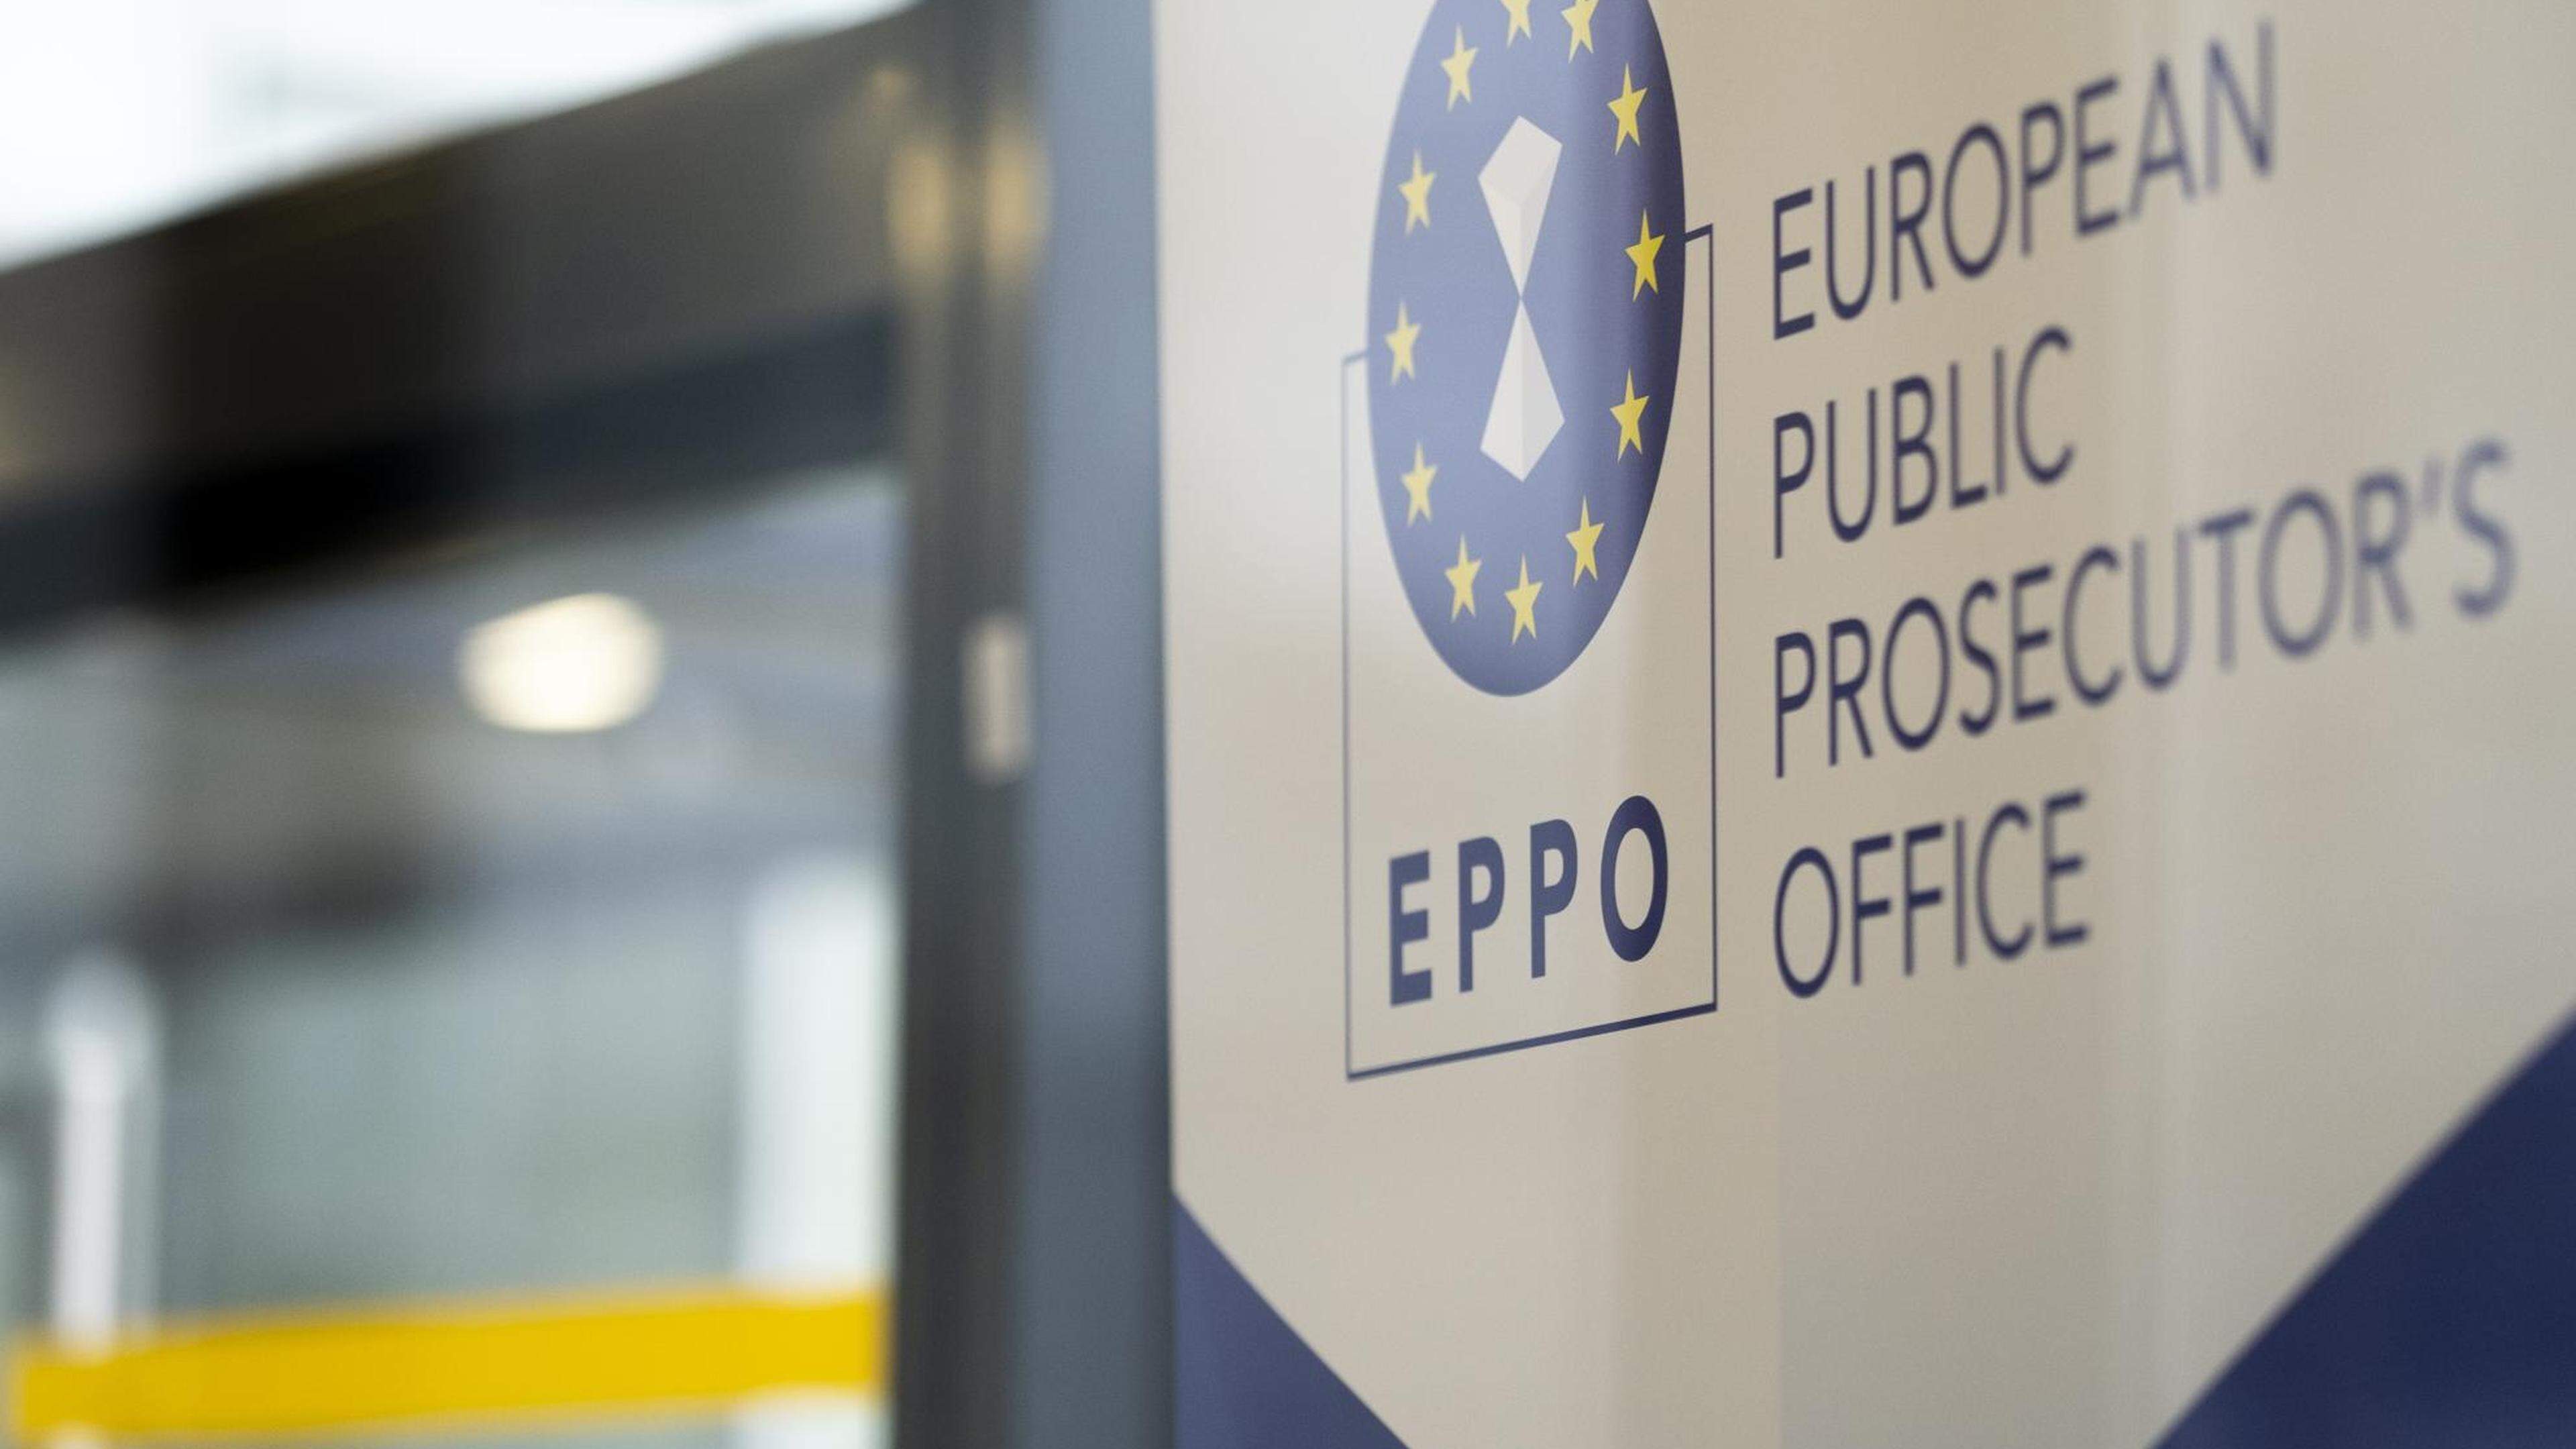 The EPPO also insists that it must move towards autonomy from the European Commission, including on its IT needs